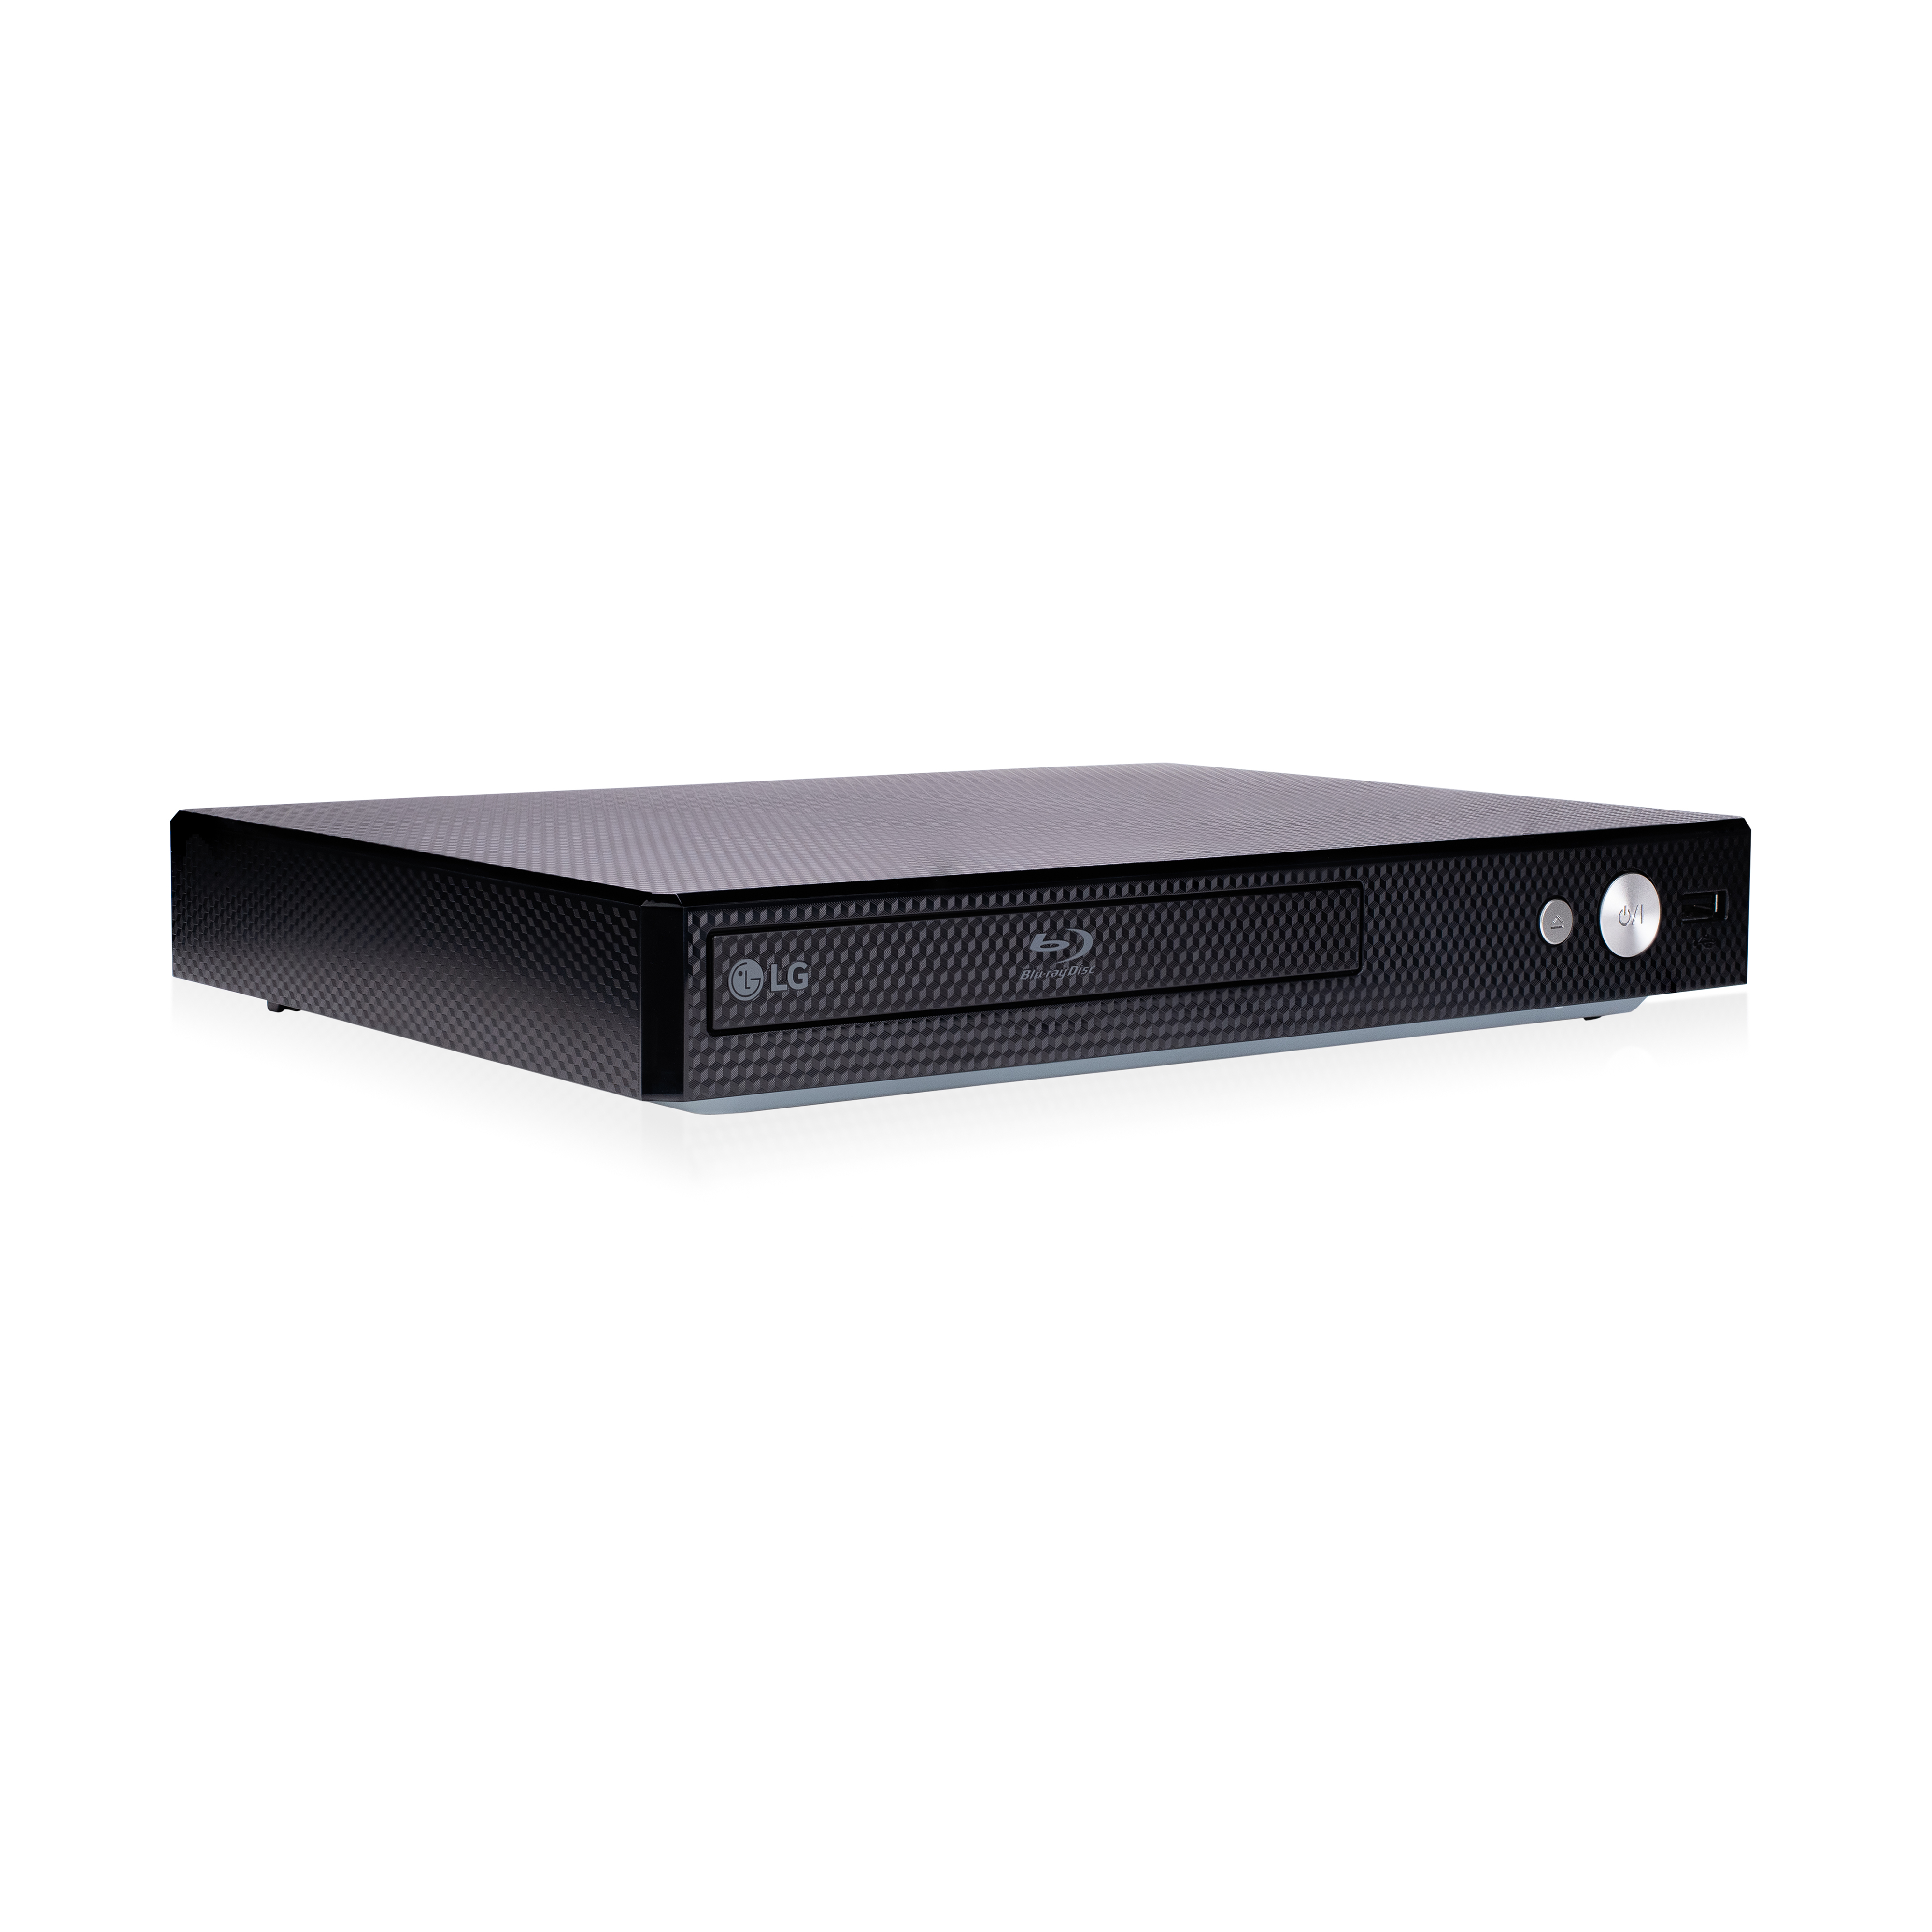 LG BPM26 Blu-ray Player with Streaming Services - image 4 of 10